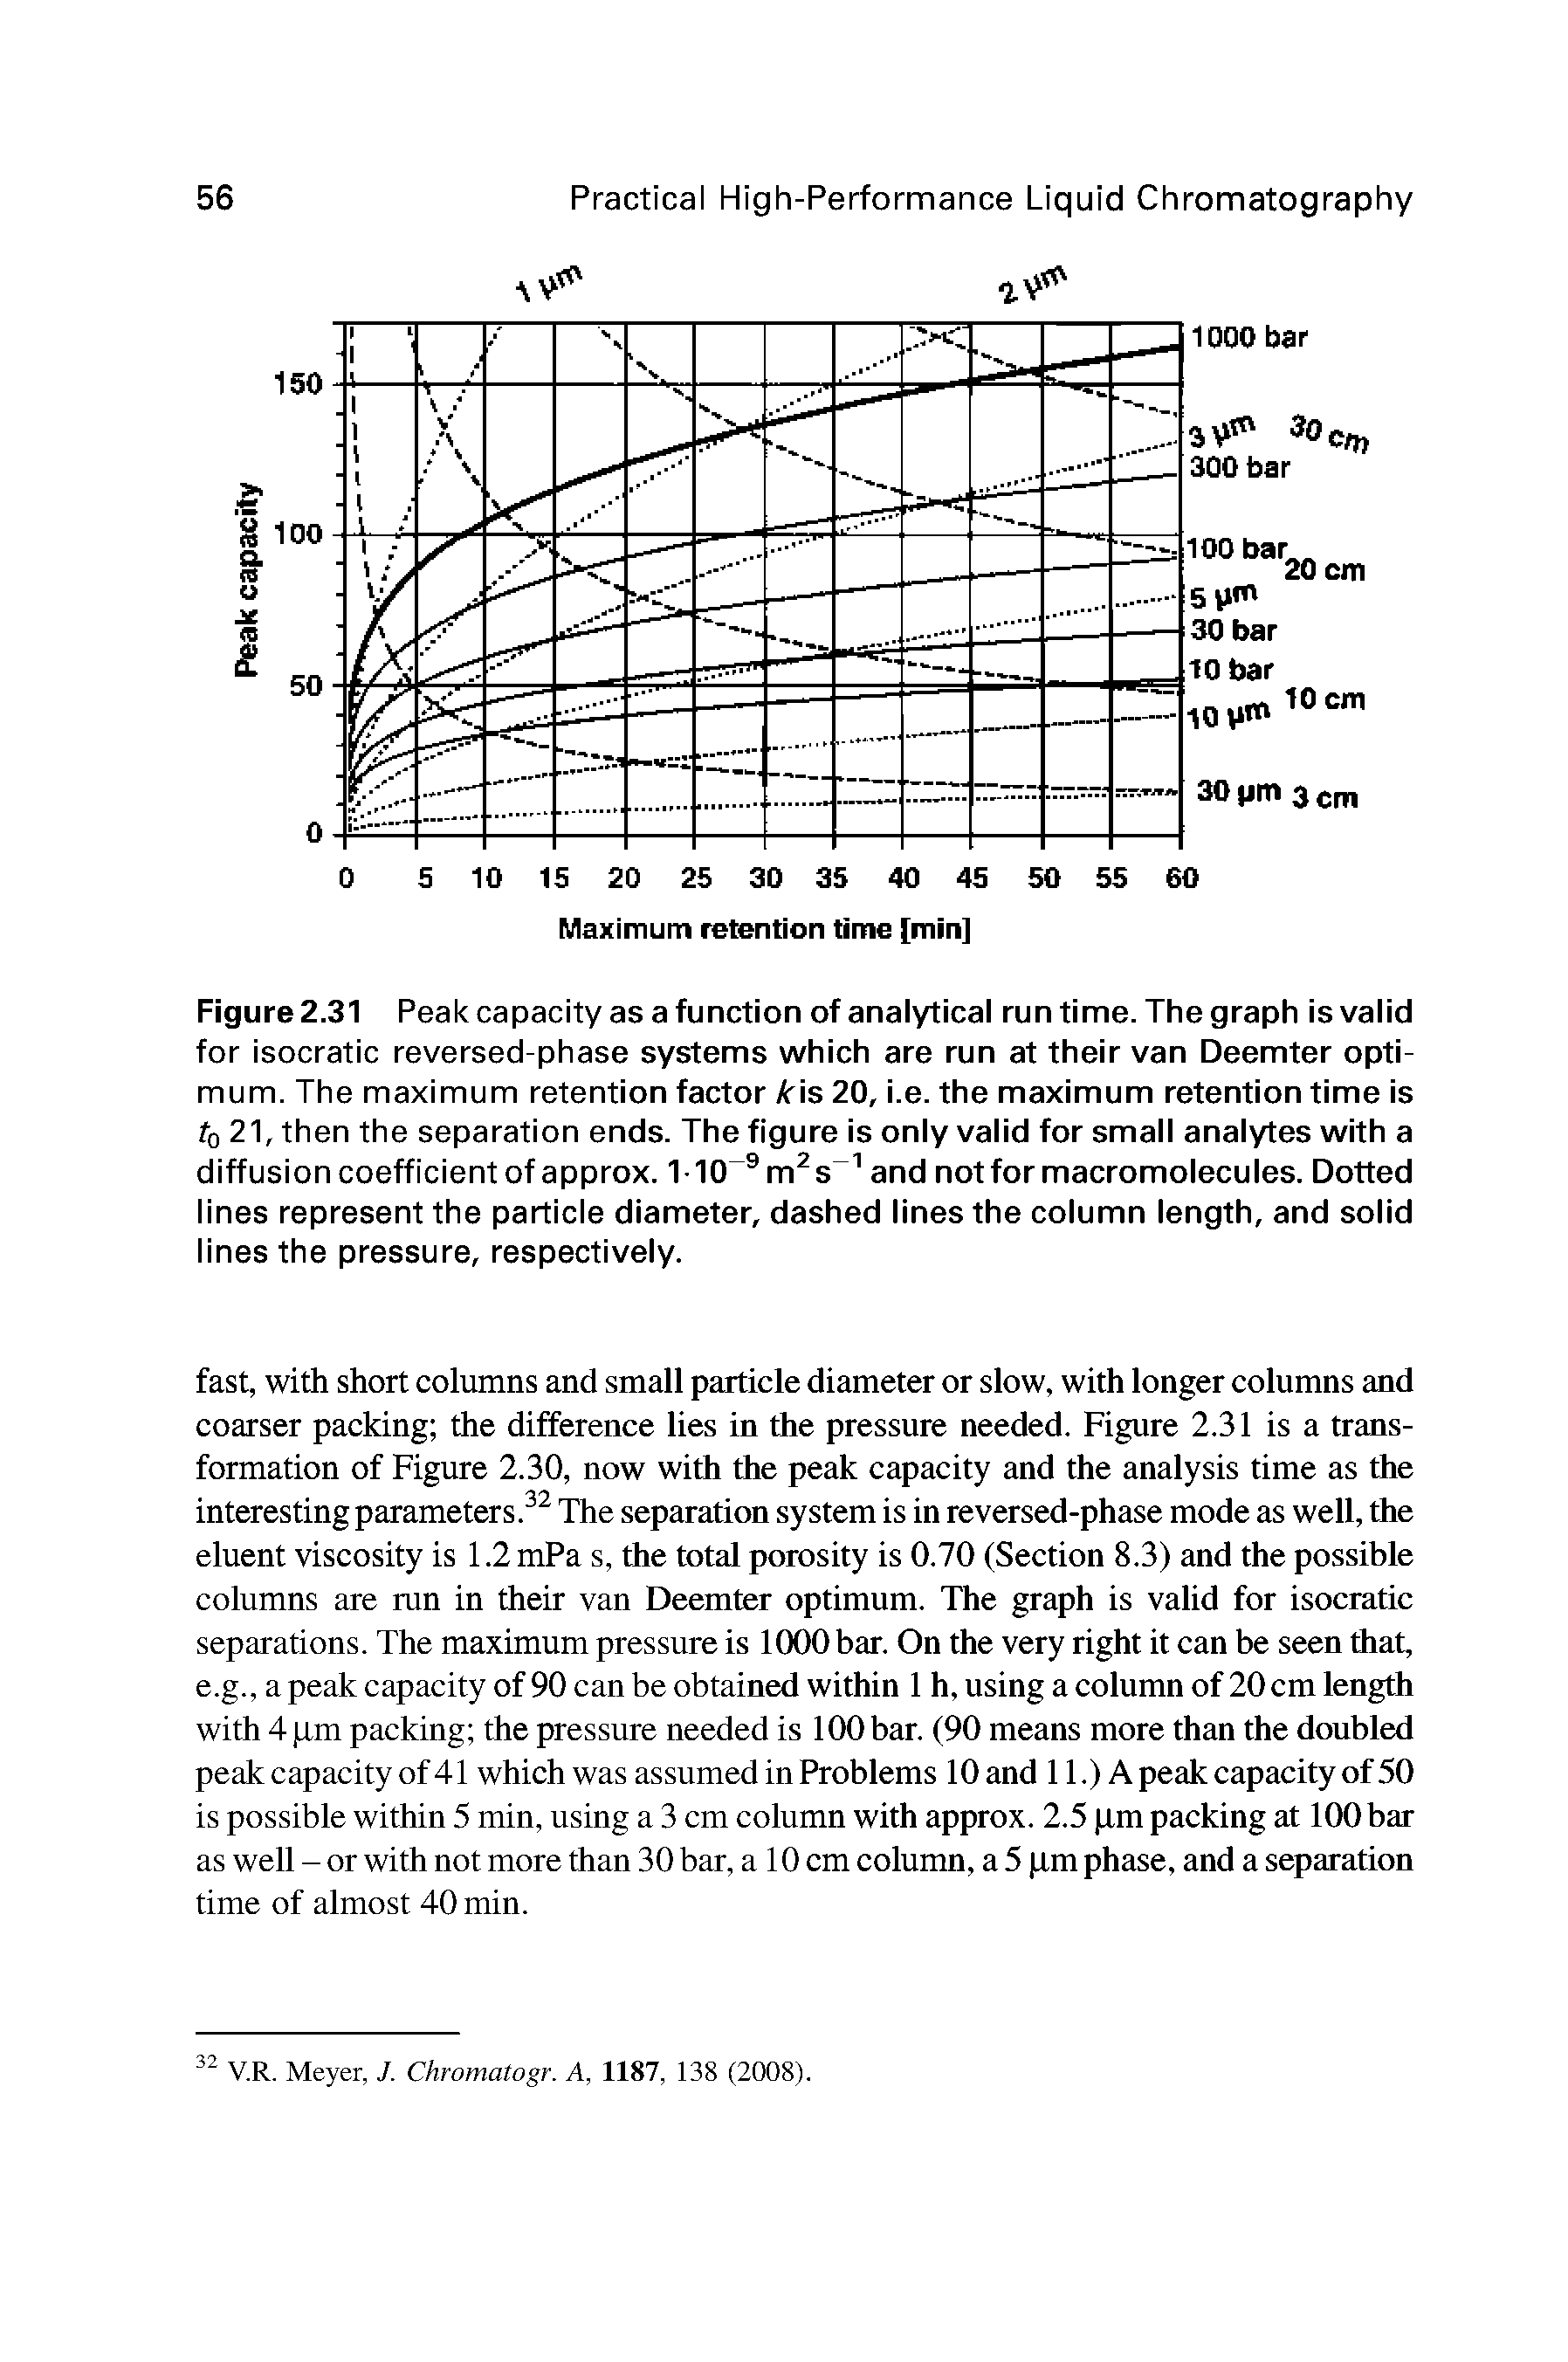 Figure 2.31 Peak capacity as a function of analytical run time. The graph is valid for isocratic reversed-phase systems which are run at their van Deemter optimum. The maximum retention factor /ris 20, i.e. the maximum retention time is to 21, then the separation ends. The figure is only valid for small analytes with a diffusion coefficient ofapprox. 1-10 m s and not for macromolecules. Dotted lines represent the particle diameter, dashed lines the column length, and solid lines the pressure, respectively.